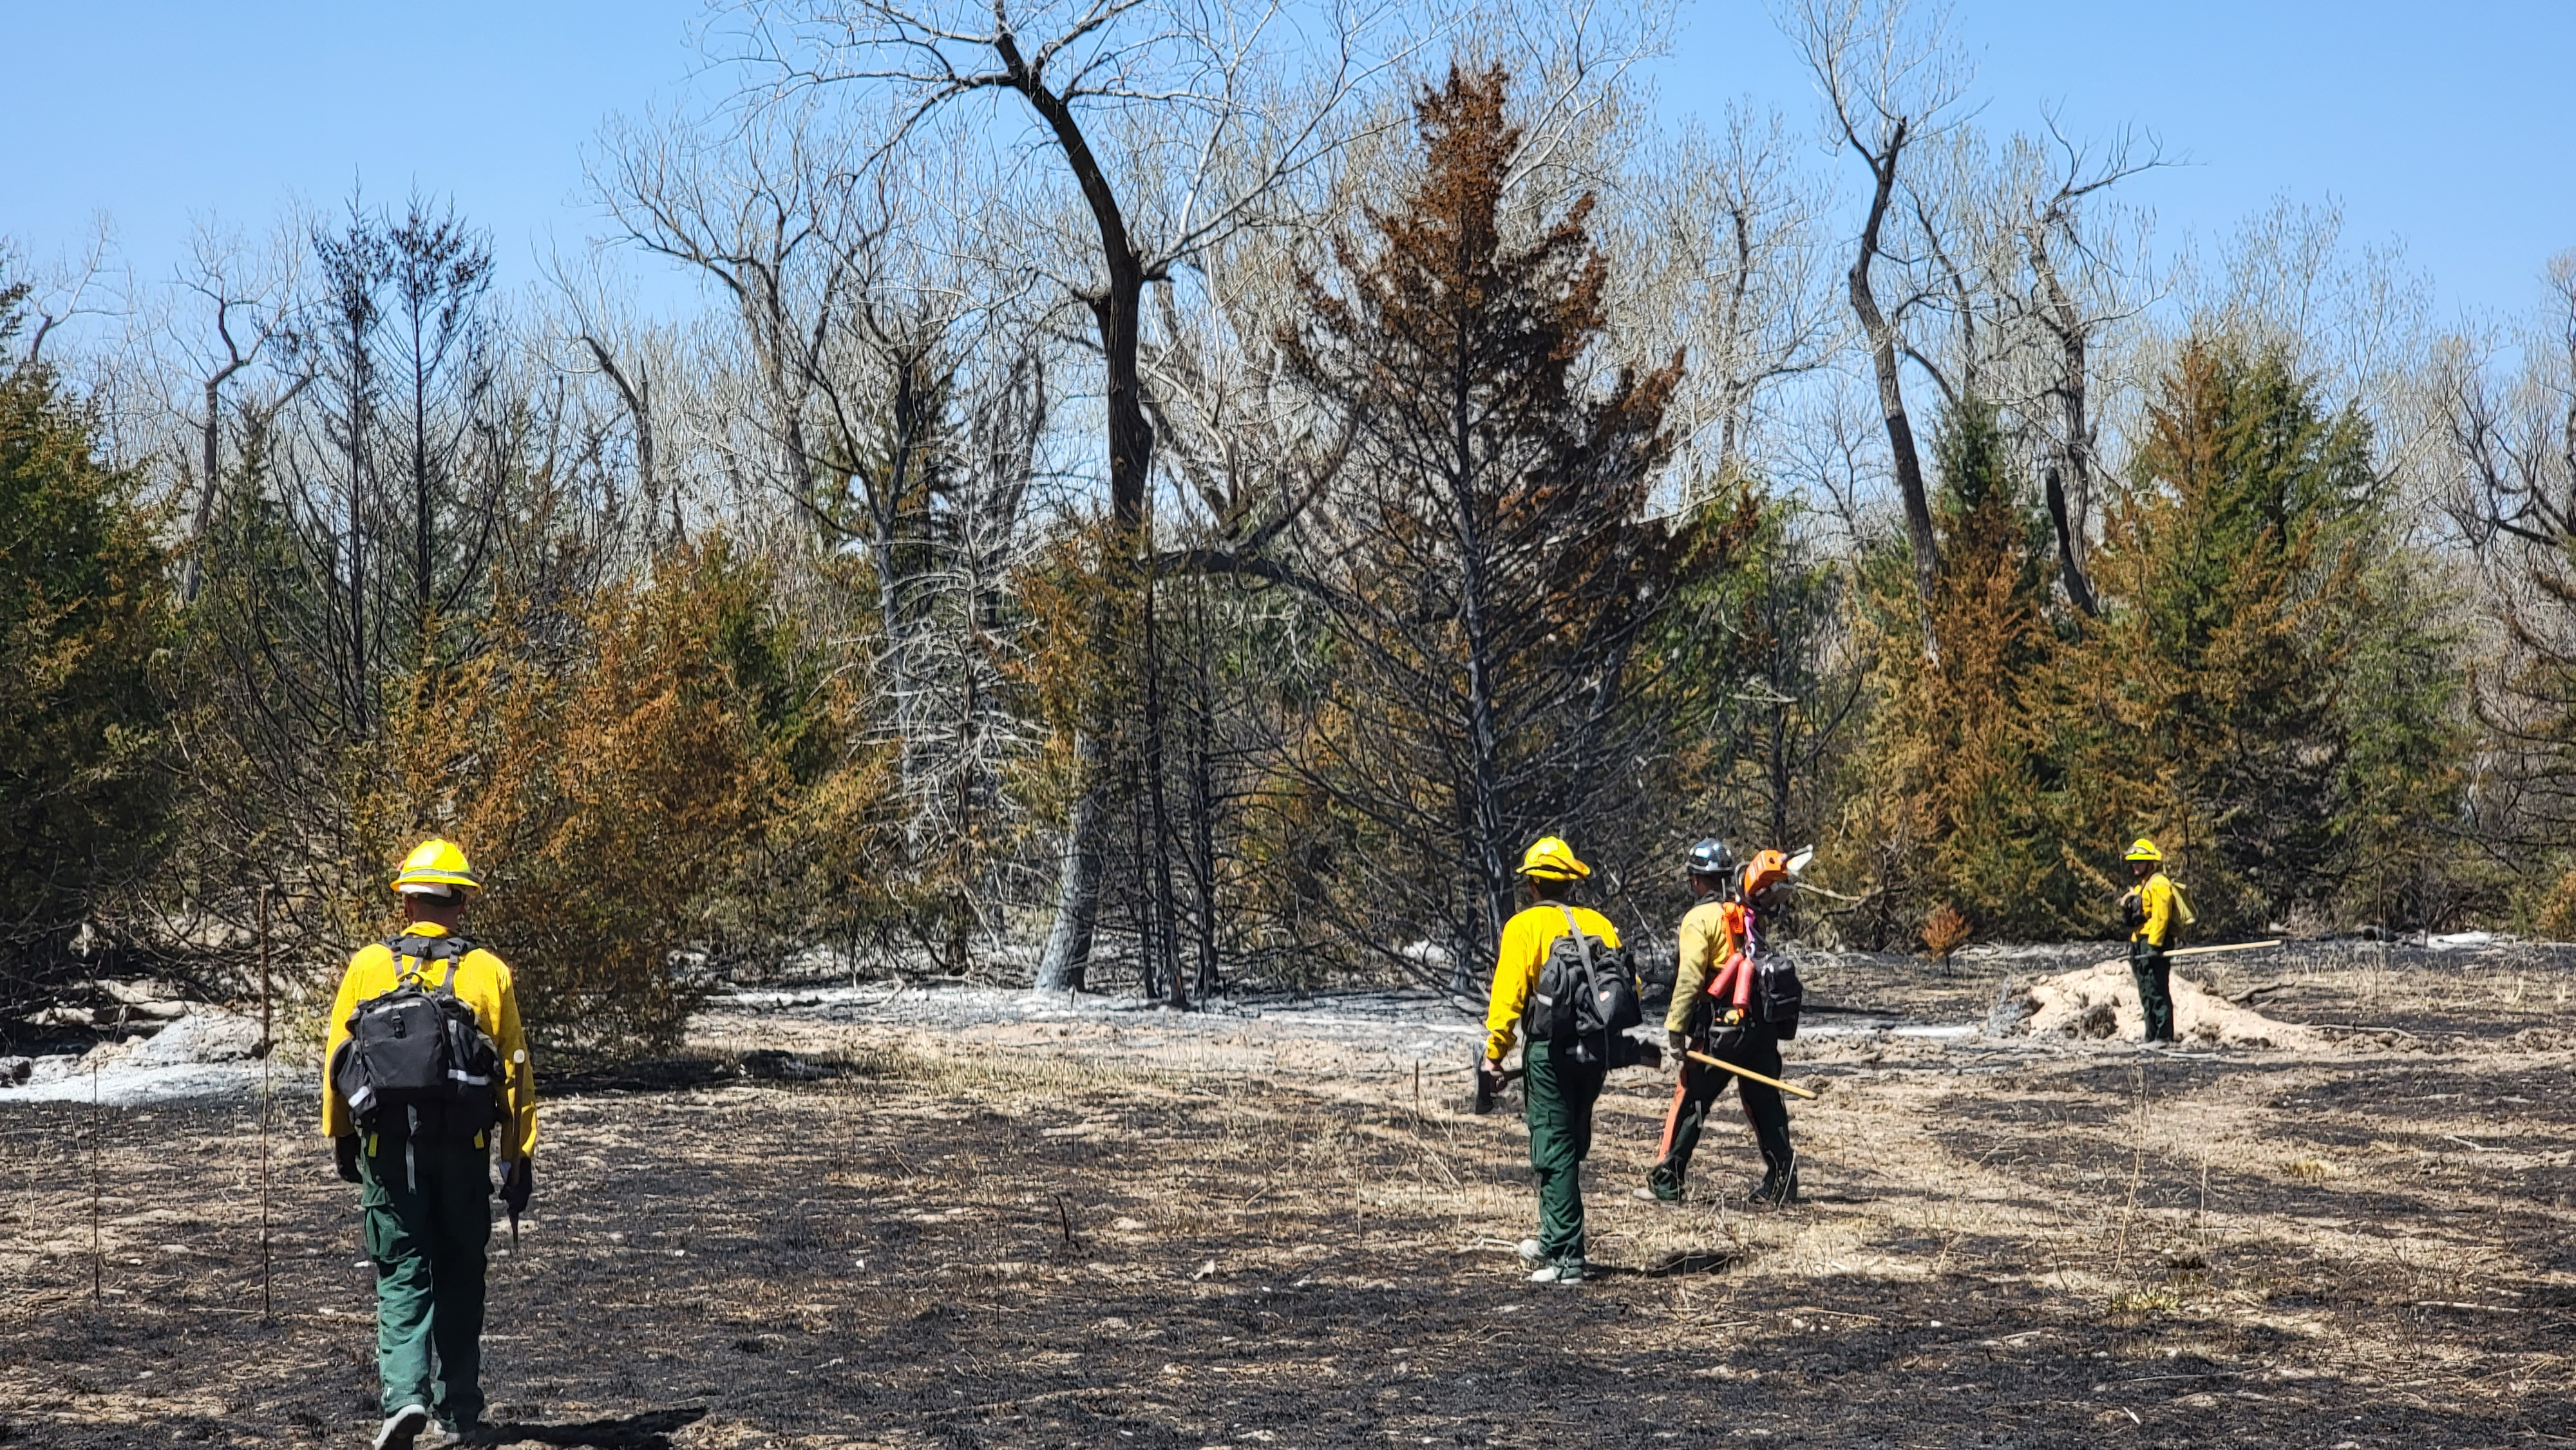 Crew of firefighters walking through forest.